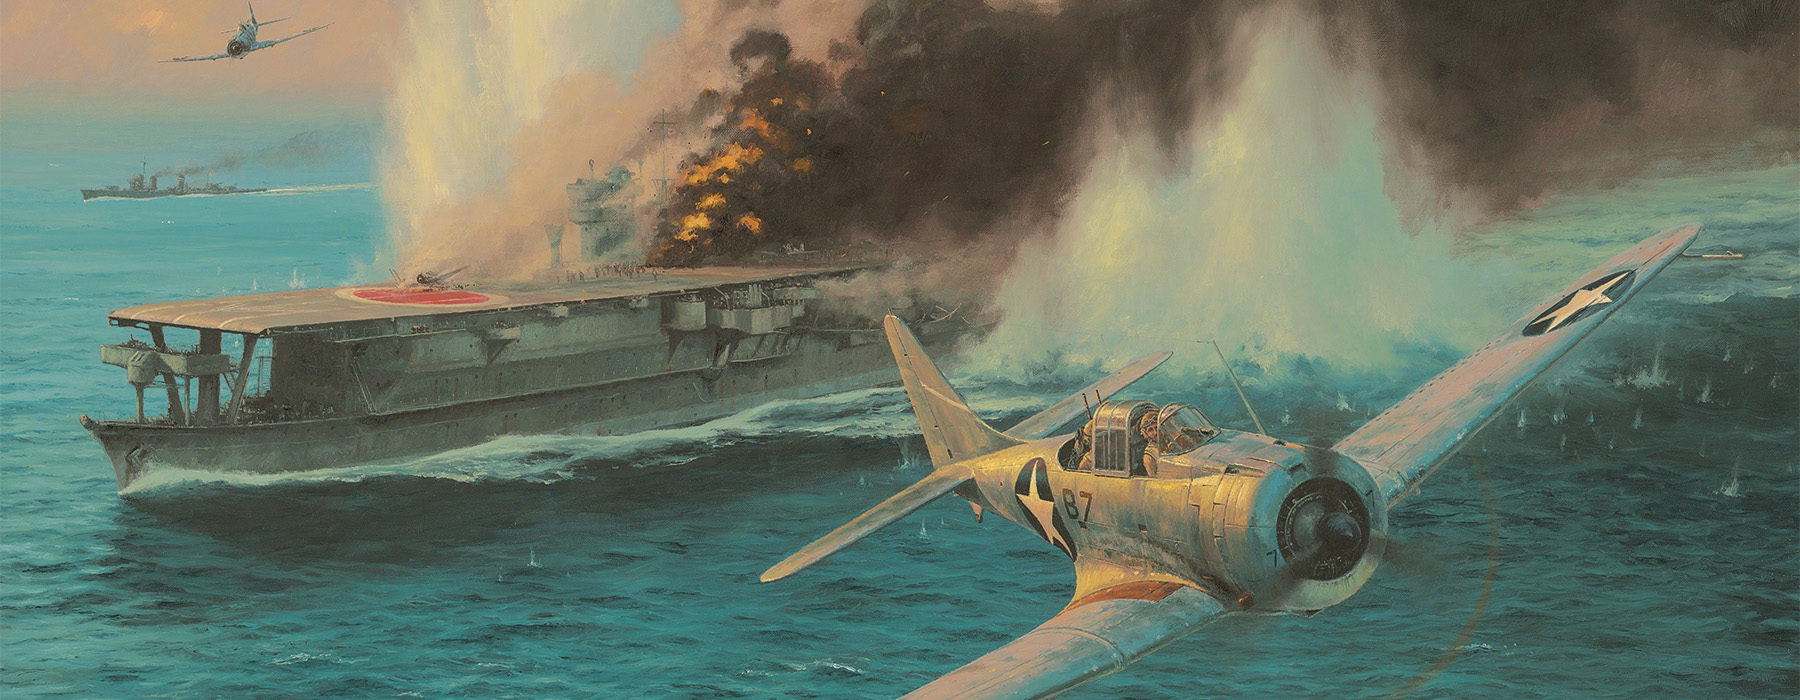 The Battle of Midway: The Complete Intelligence Story